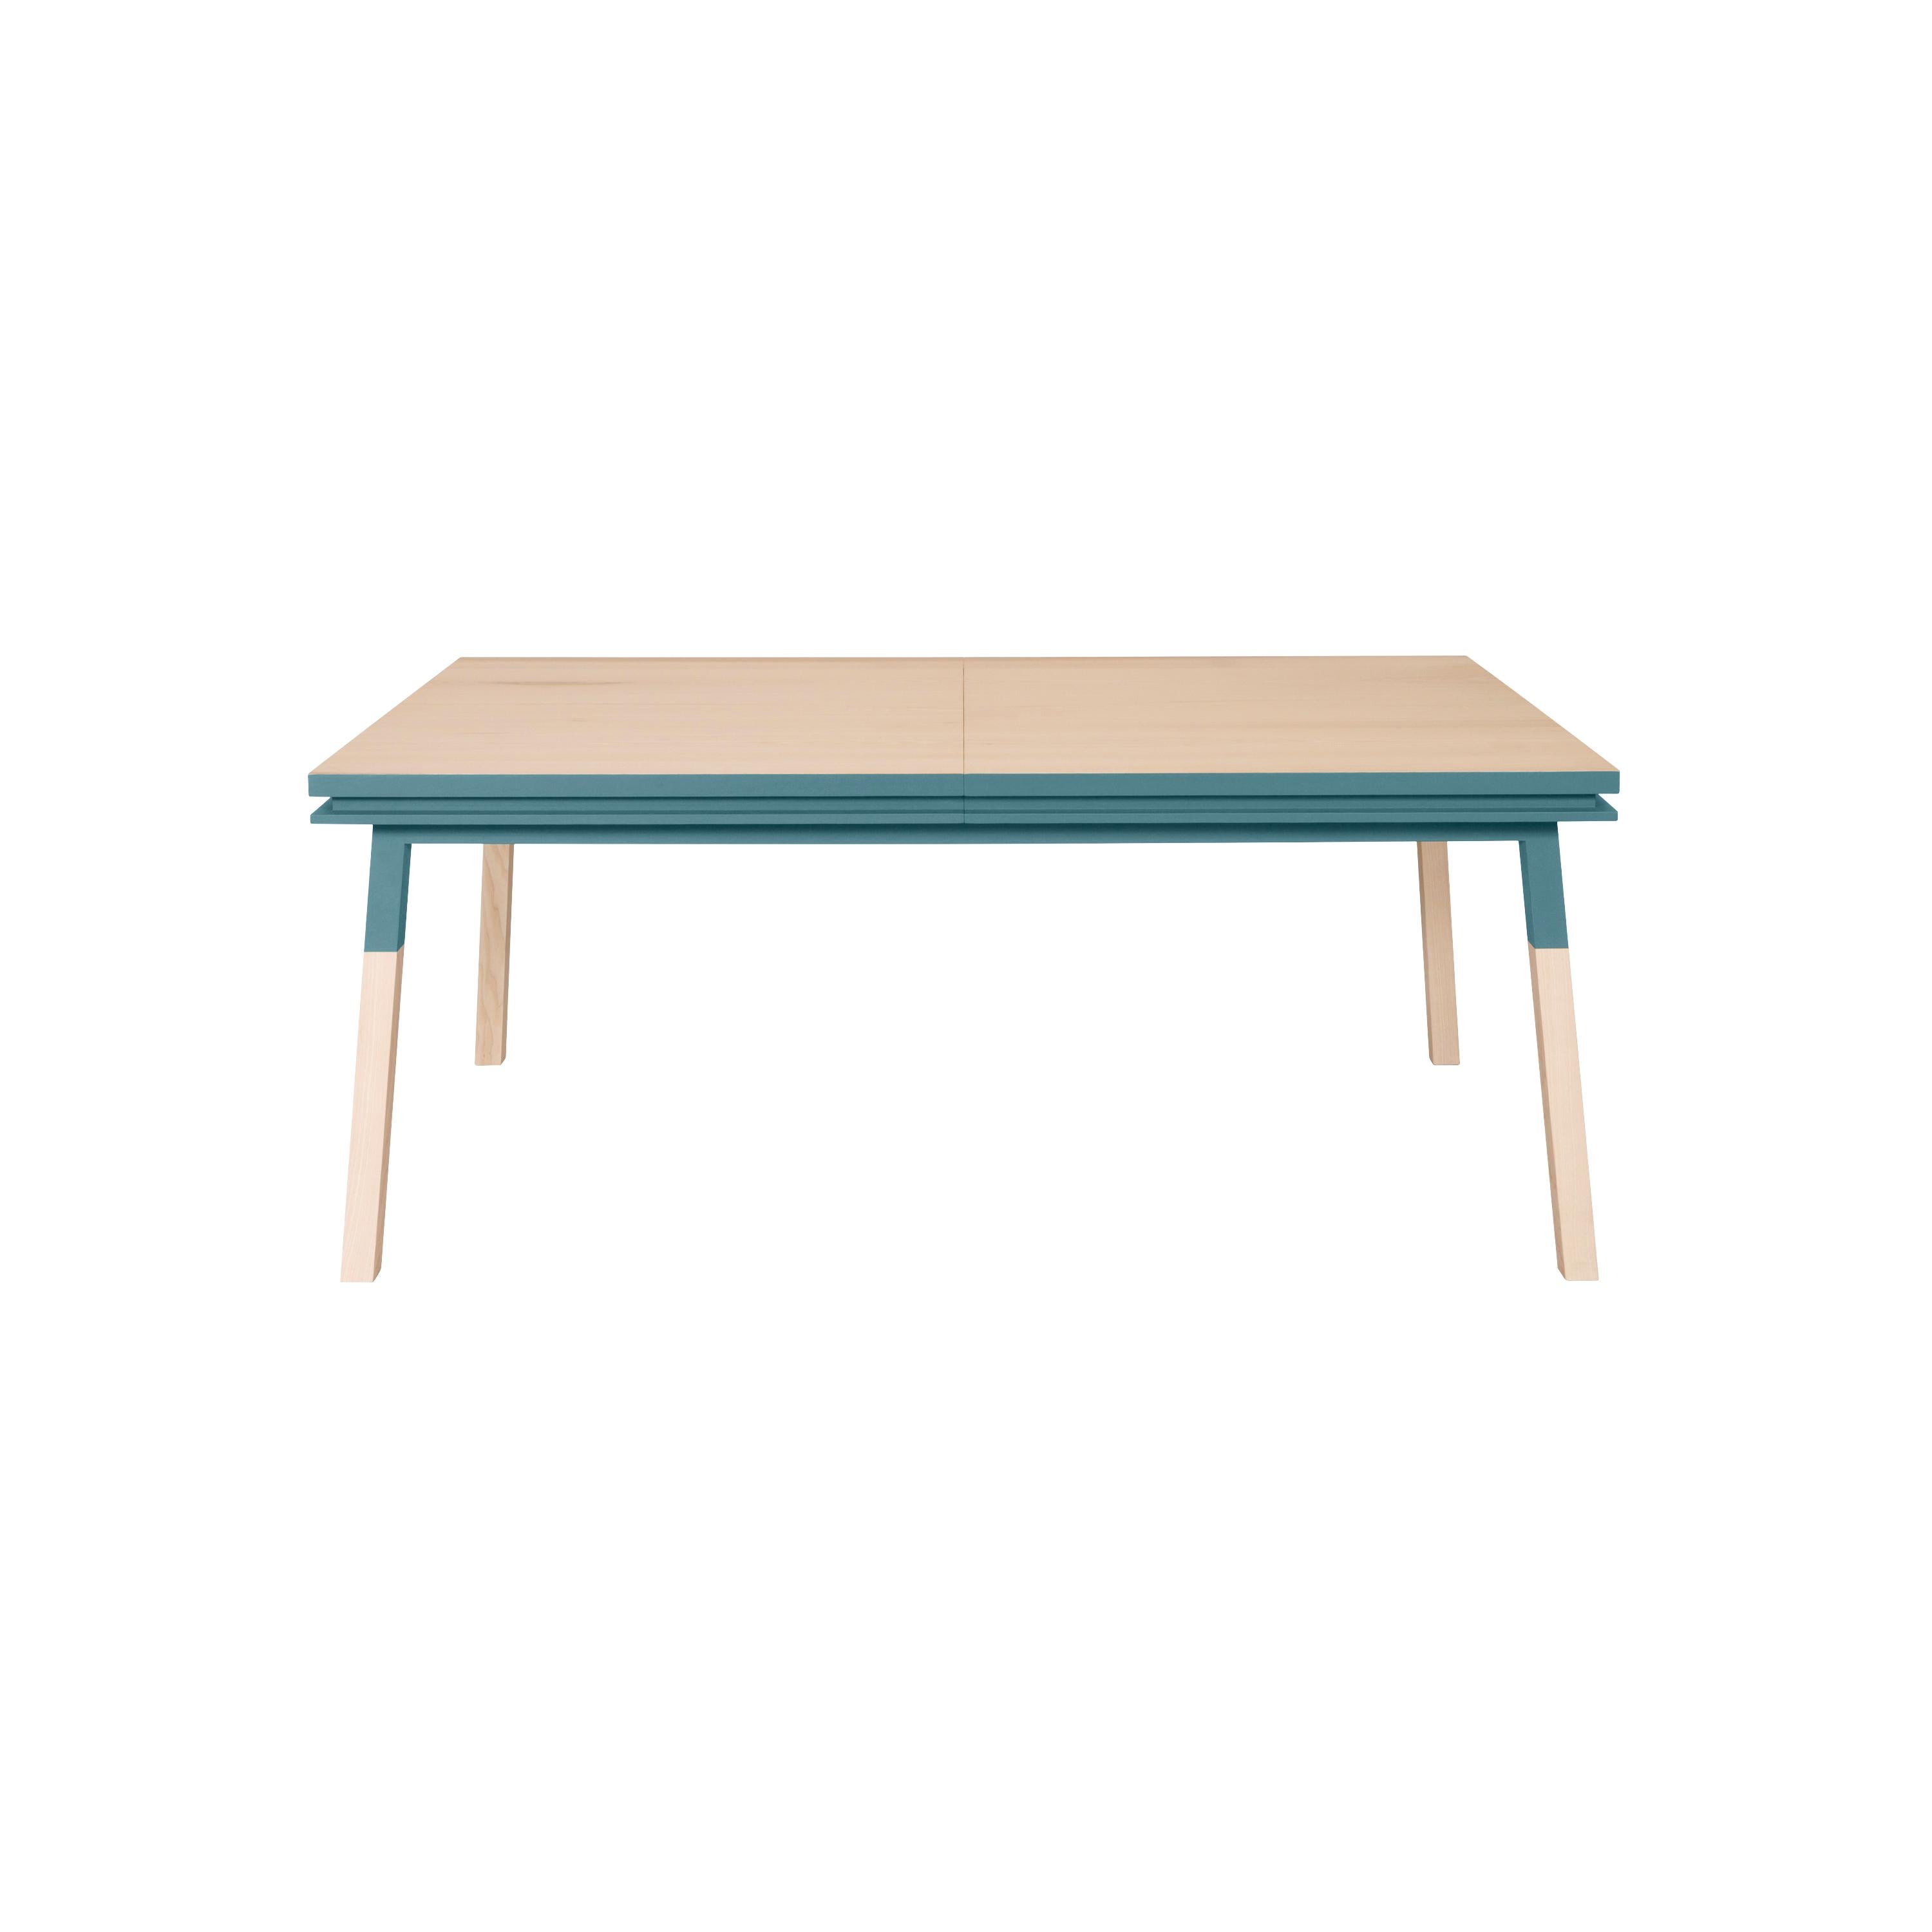 Light Blue Extensible Table in Solid Ash Wood, Designed by Eric Gizard, Paris In New Condition For Sale In Landivy, FR